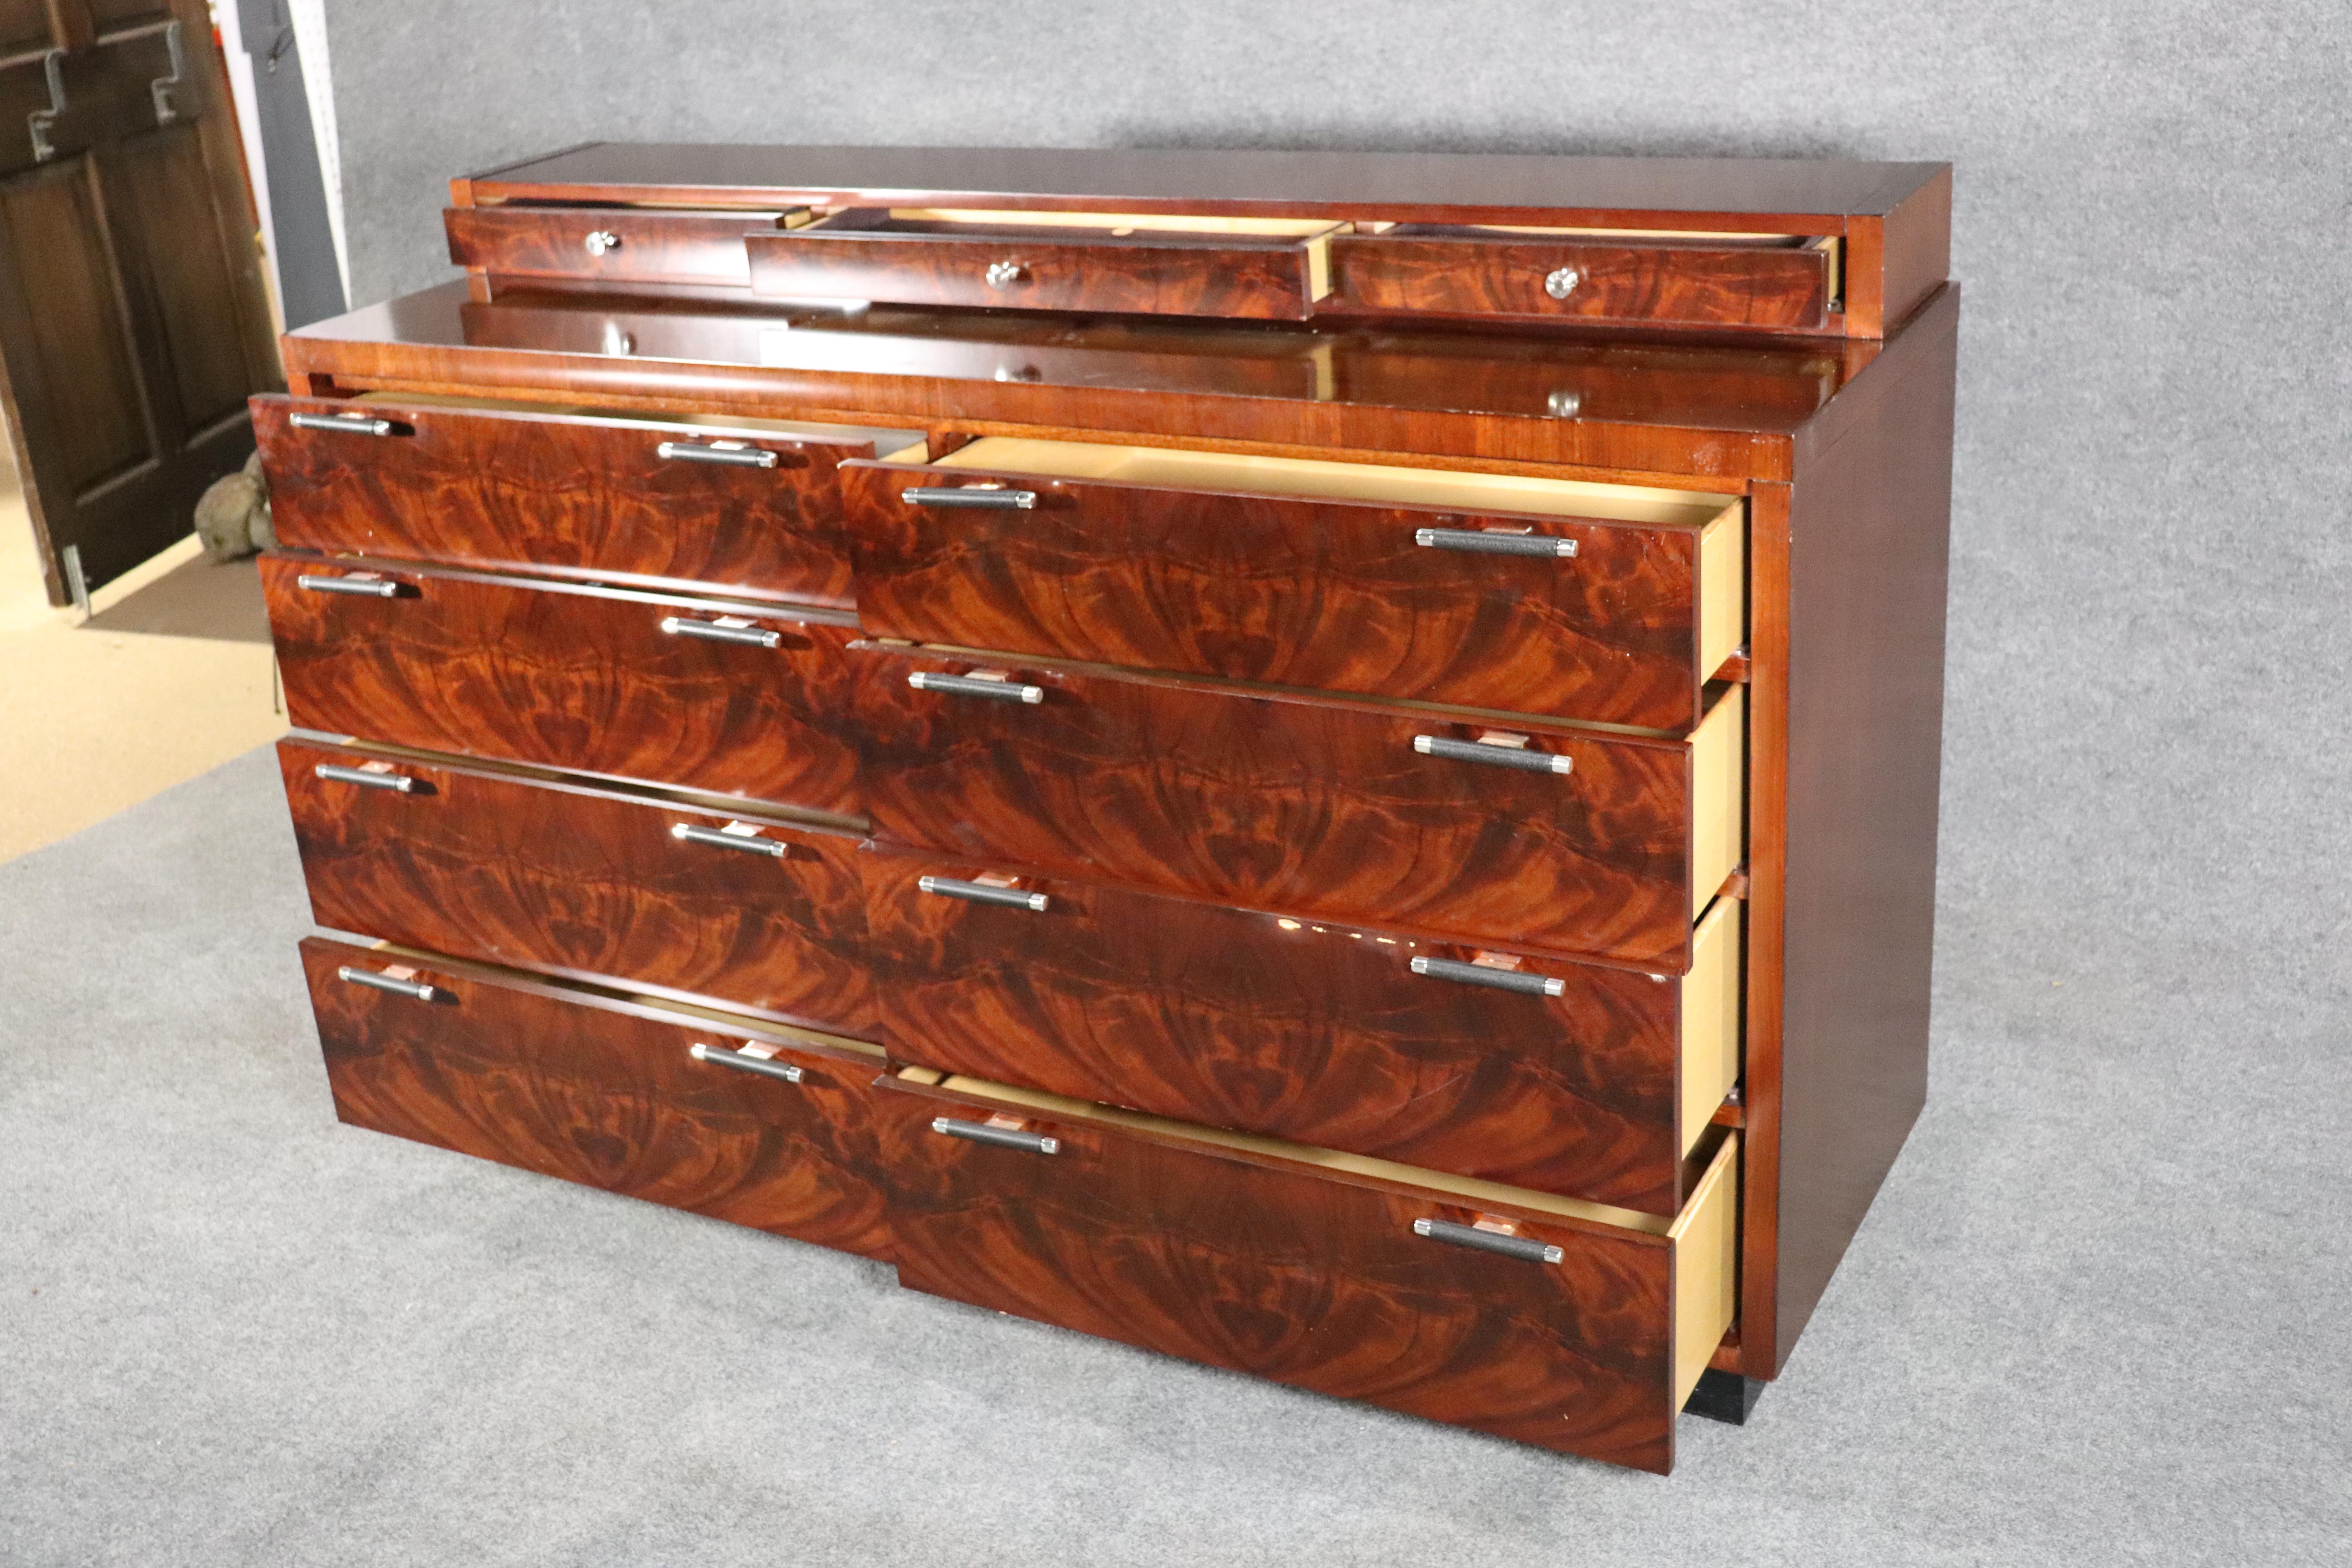 Deco style chest of drawers in rich mahogany with eight wide drawers and three gentleman's drawers on top. Deep grain wood veneer with leather wrapped handles. The drawers interior depth is 15 1/2in.
Please confirm location.